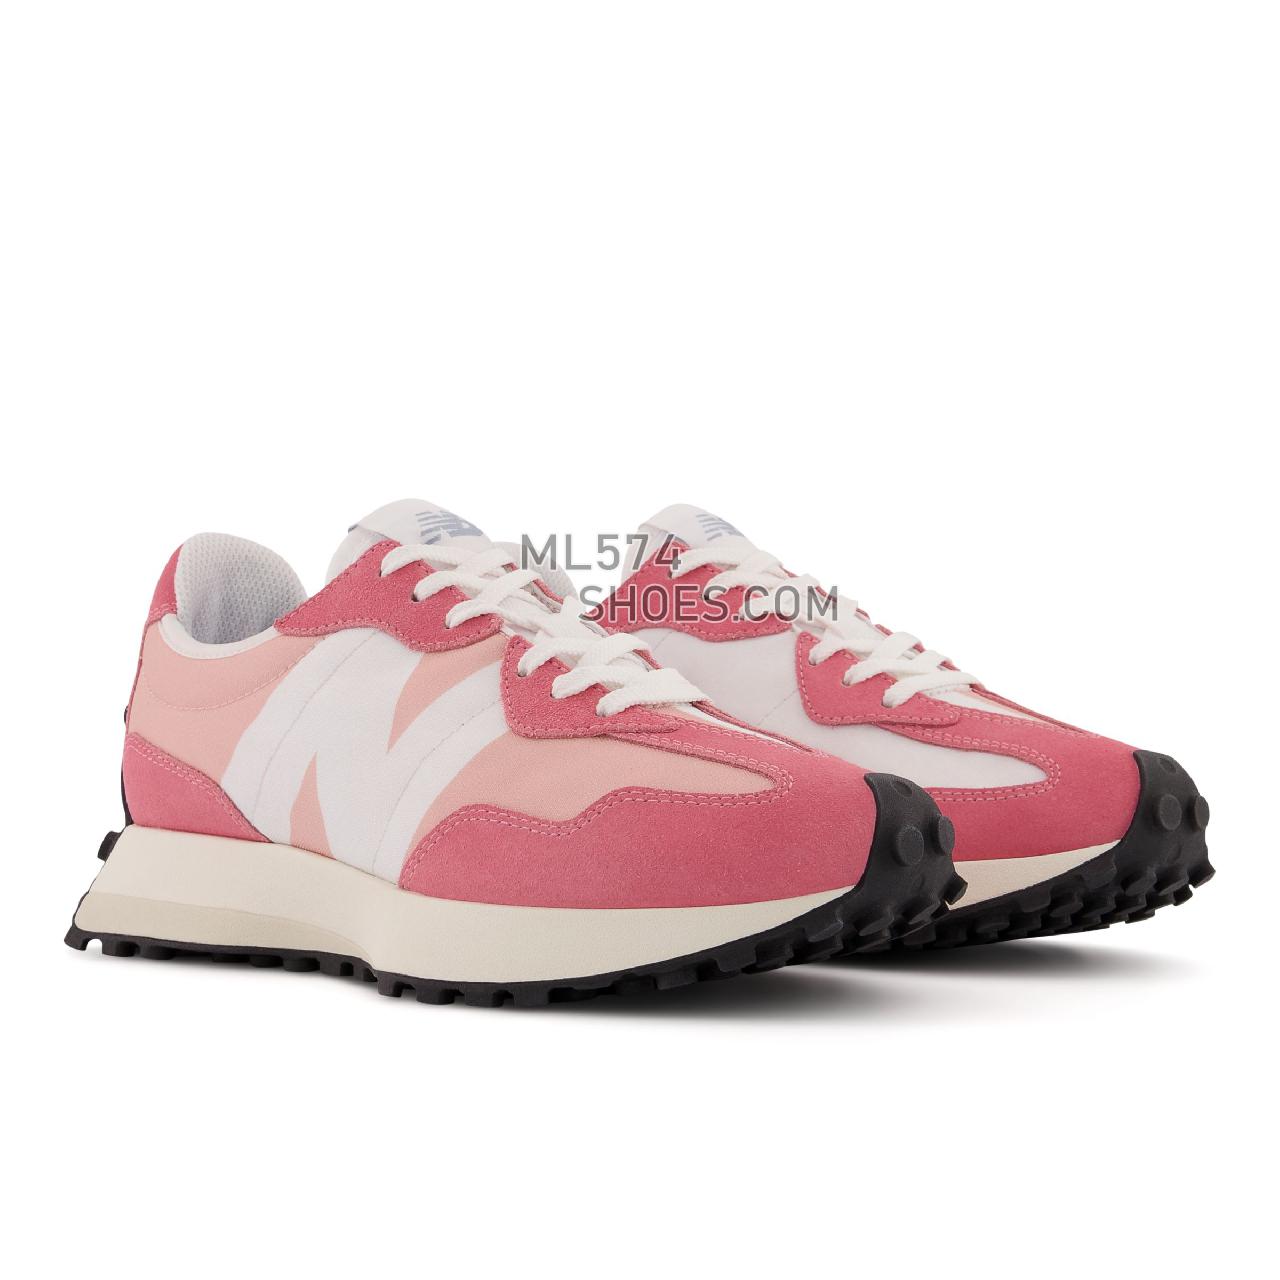 New Balance 327 - Women's Classic Sneakers - Natural Pink with White - WS327LAG